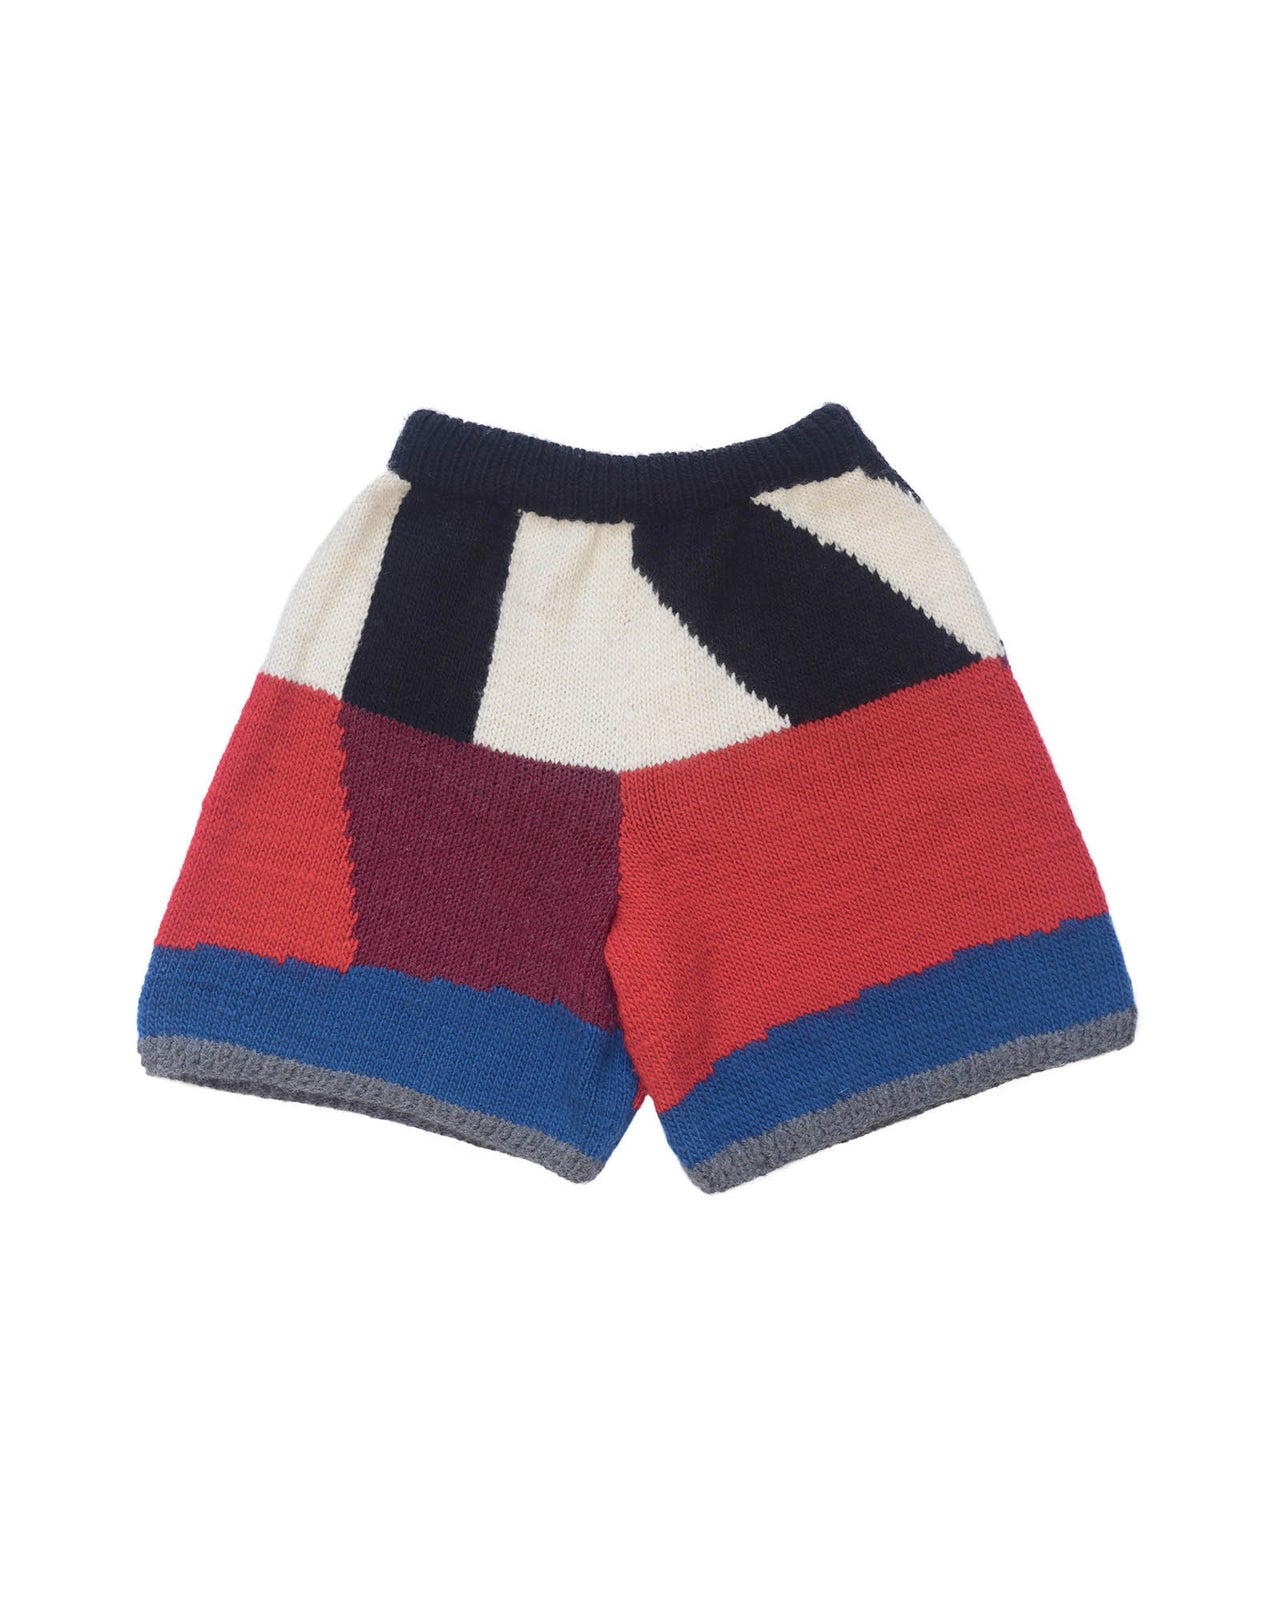 Wool bermuda shorts from the back layed flat. Black, white, bordeau, red and white colour block pattern on shorts. 